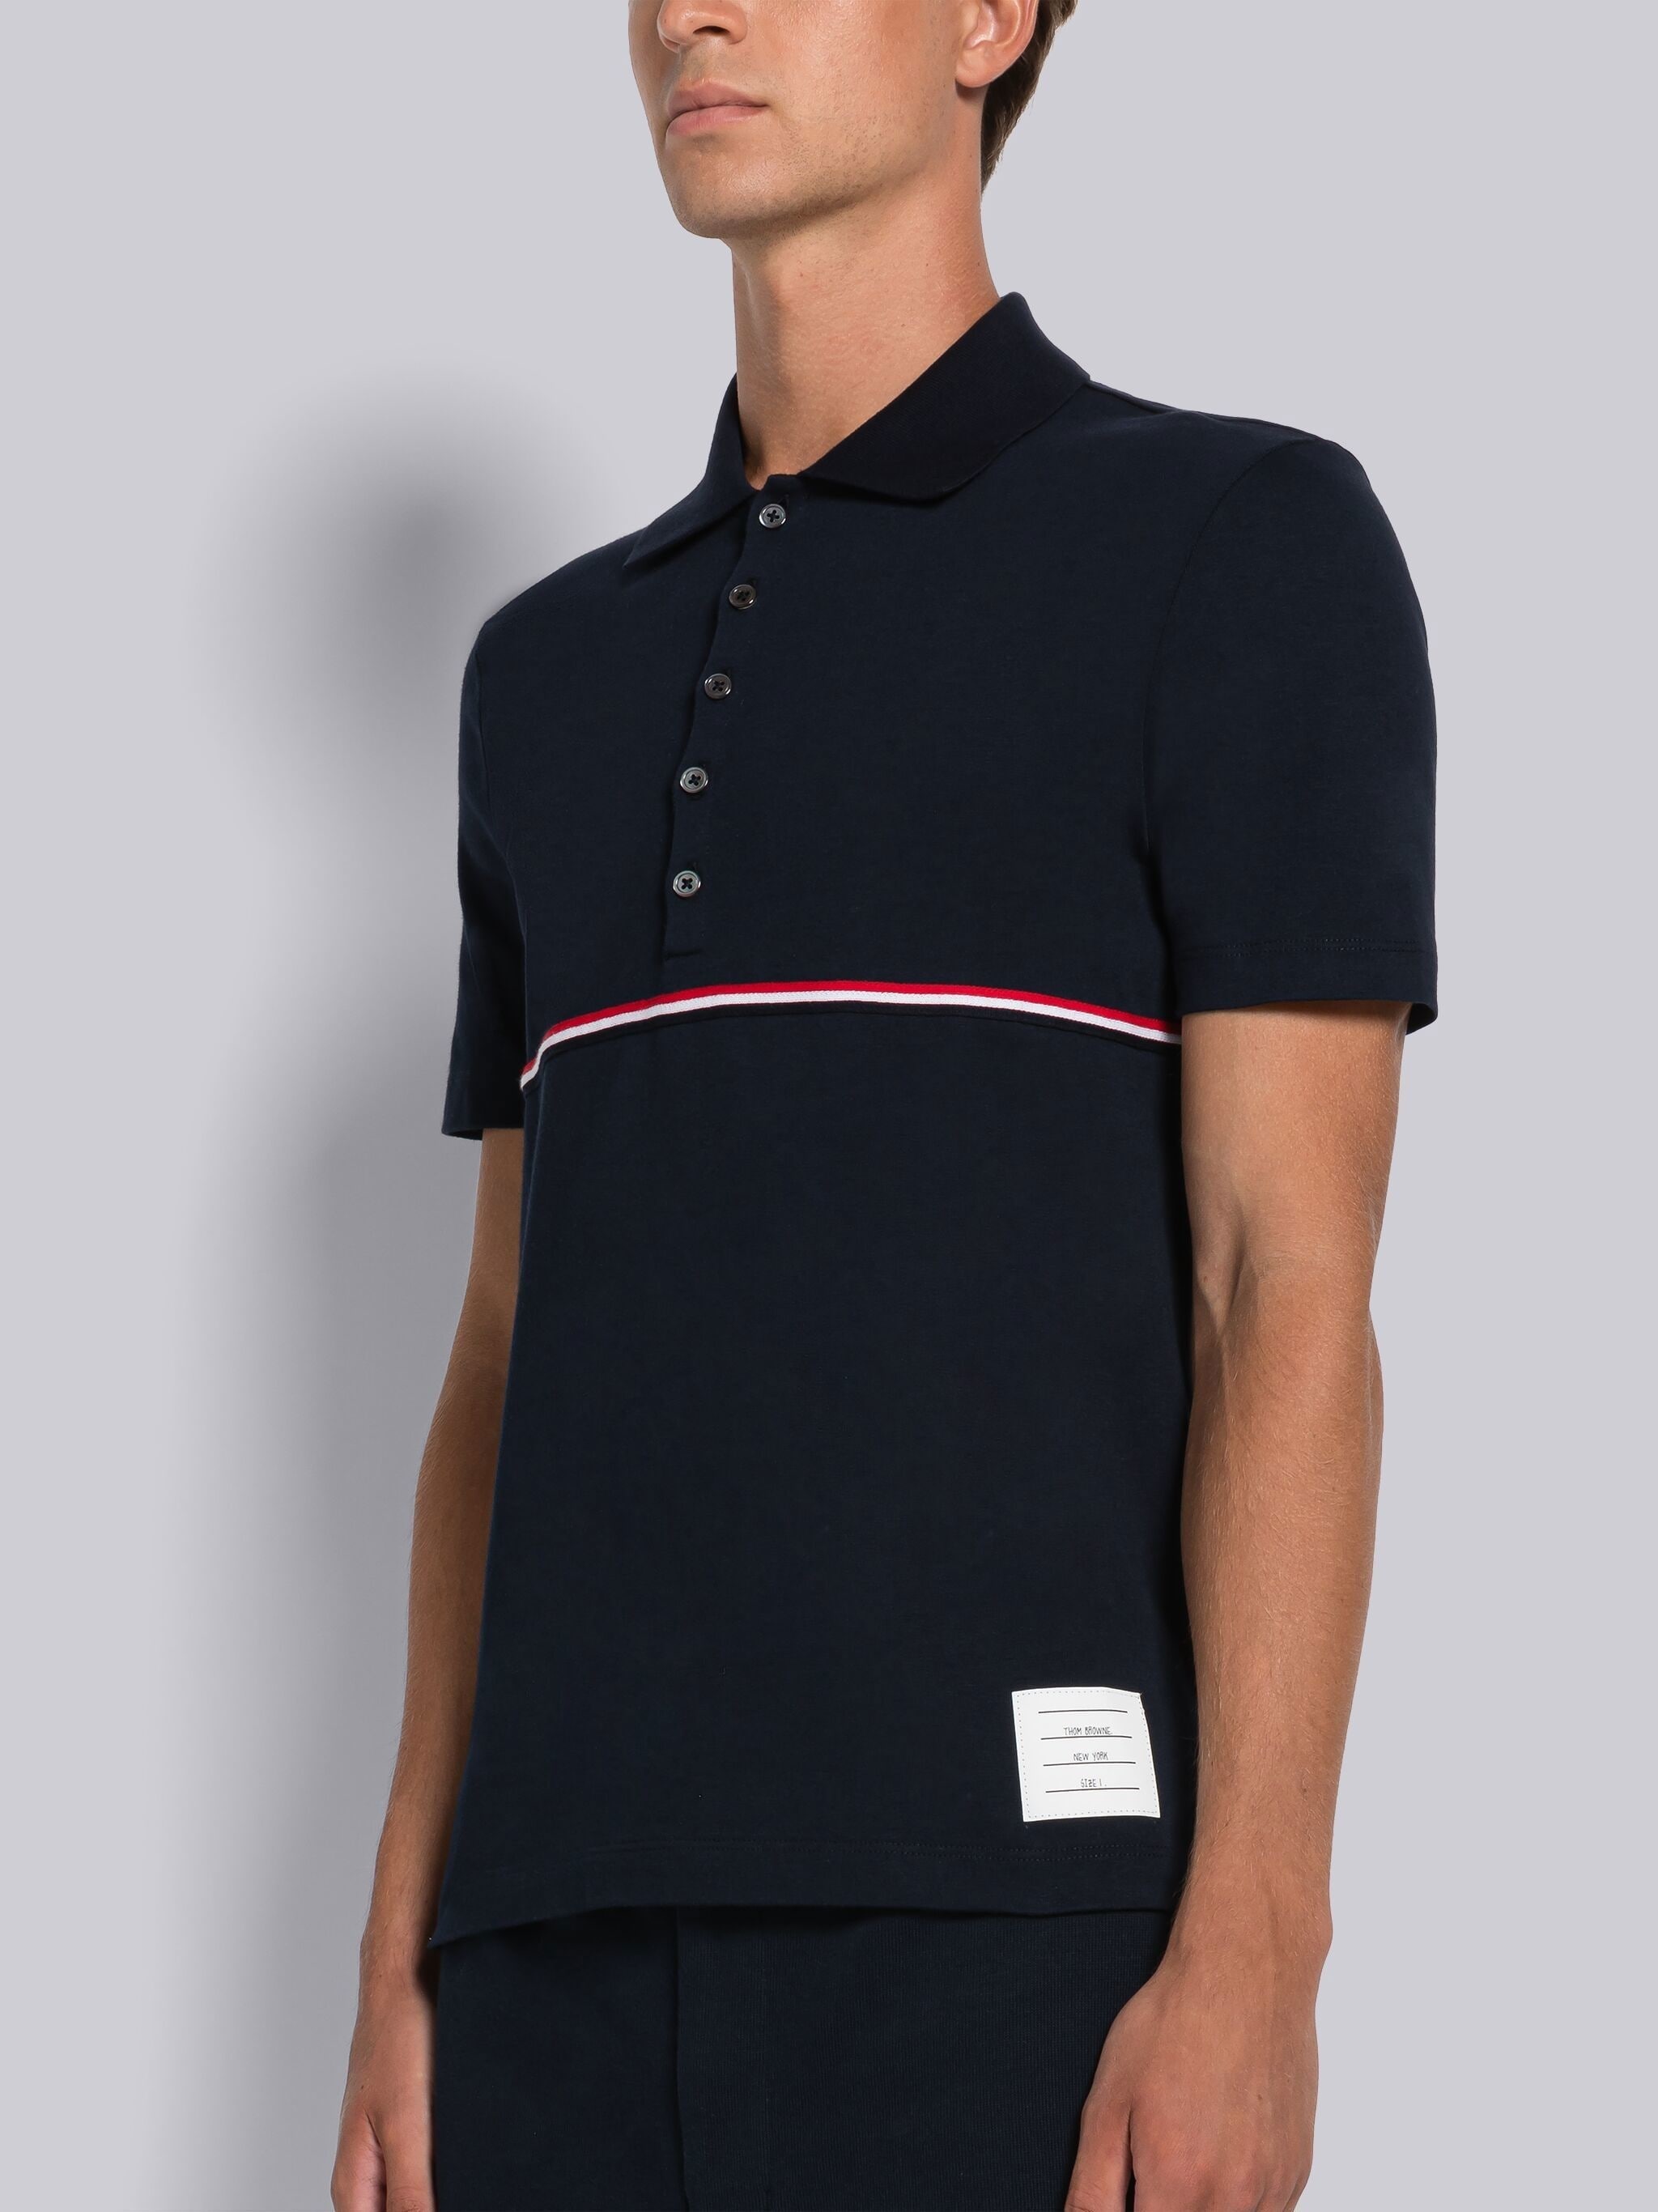 Midweight Jersey Stripe Short Sleeve Polo - 2